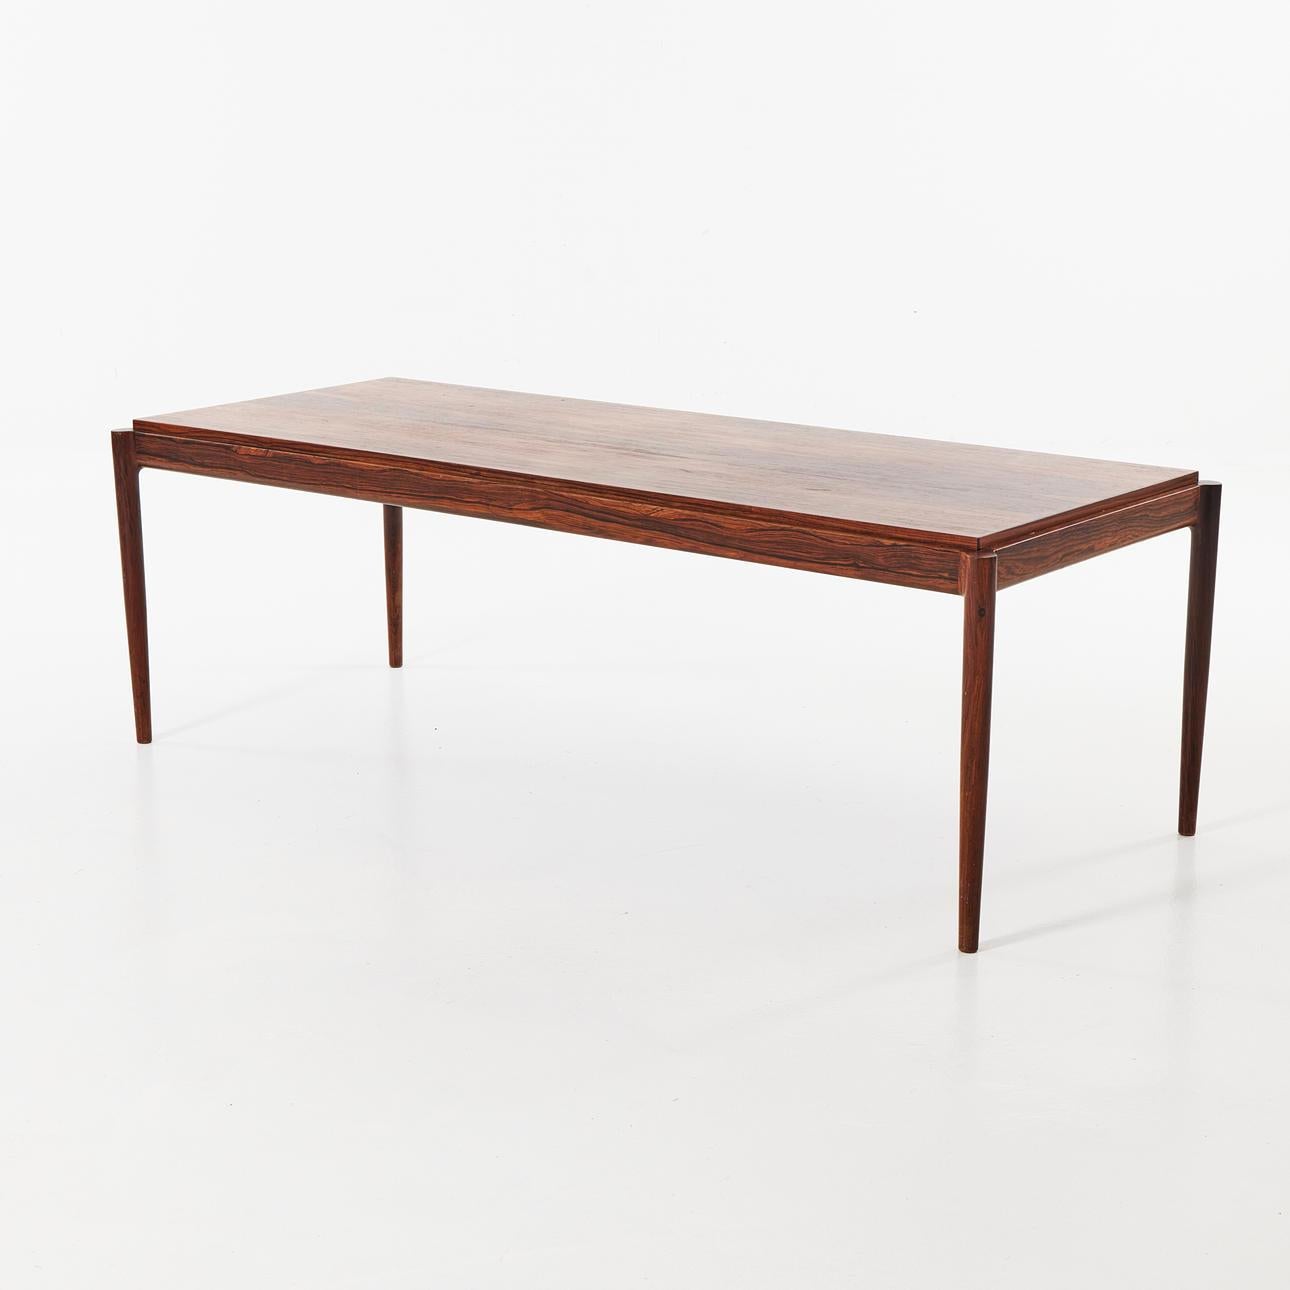 Elegant living room table by the great Danish designer Ib Kofod Larsen. Its legs outside the structure and its slightly raised top give it its refinement and originality and the rosewood, depth and warmth. This table is of high manufacturing quality